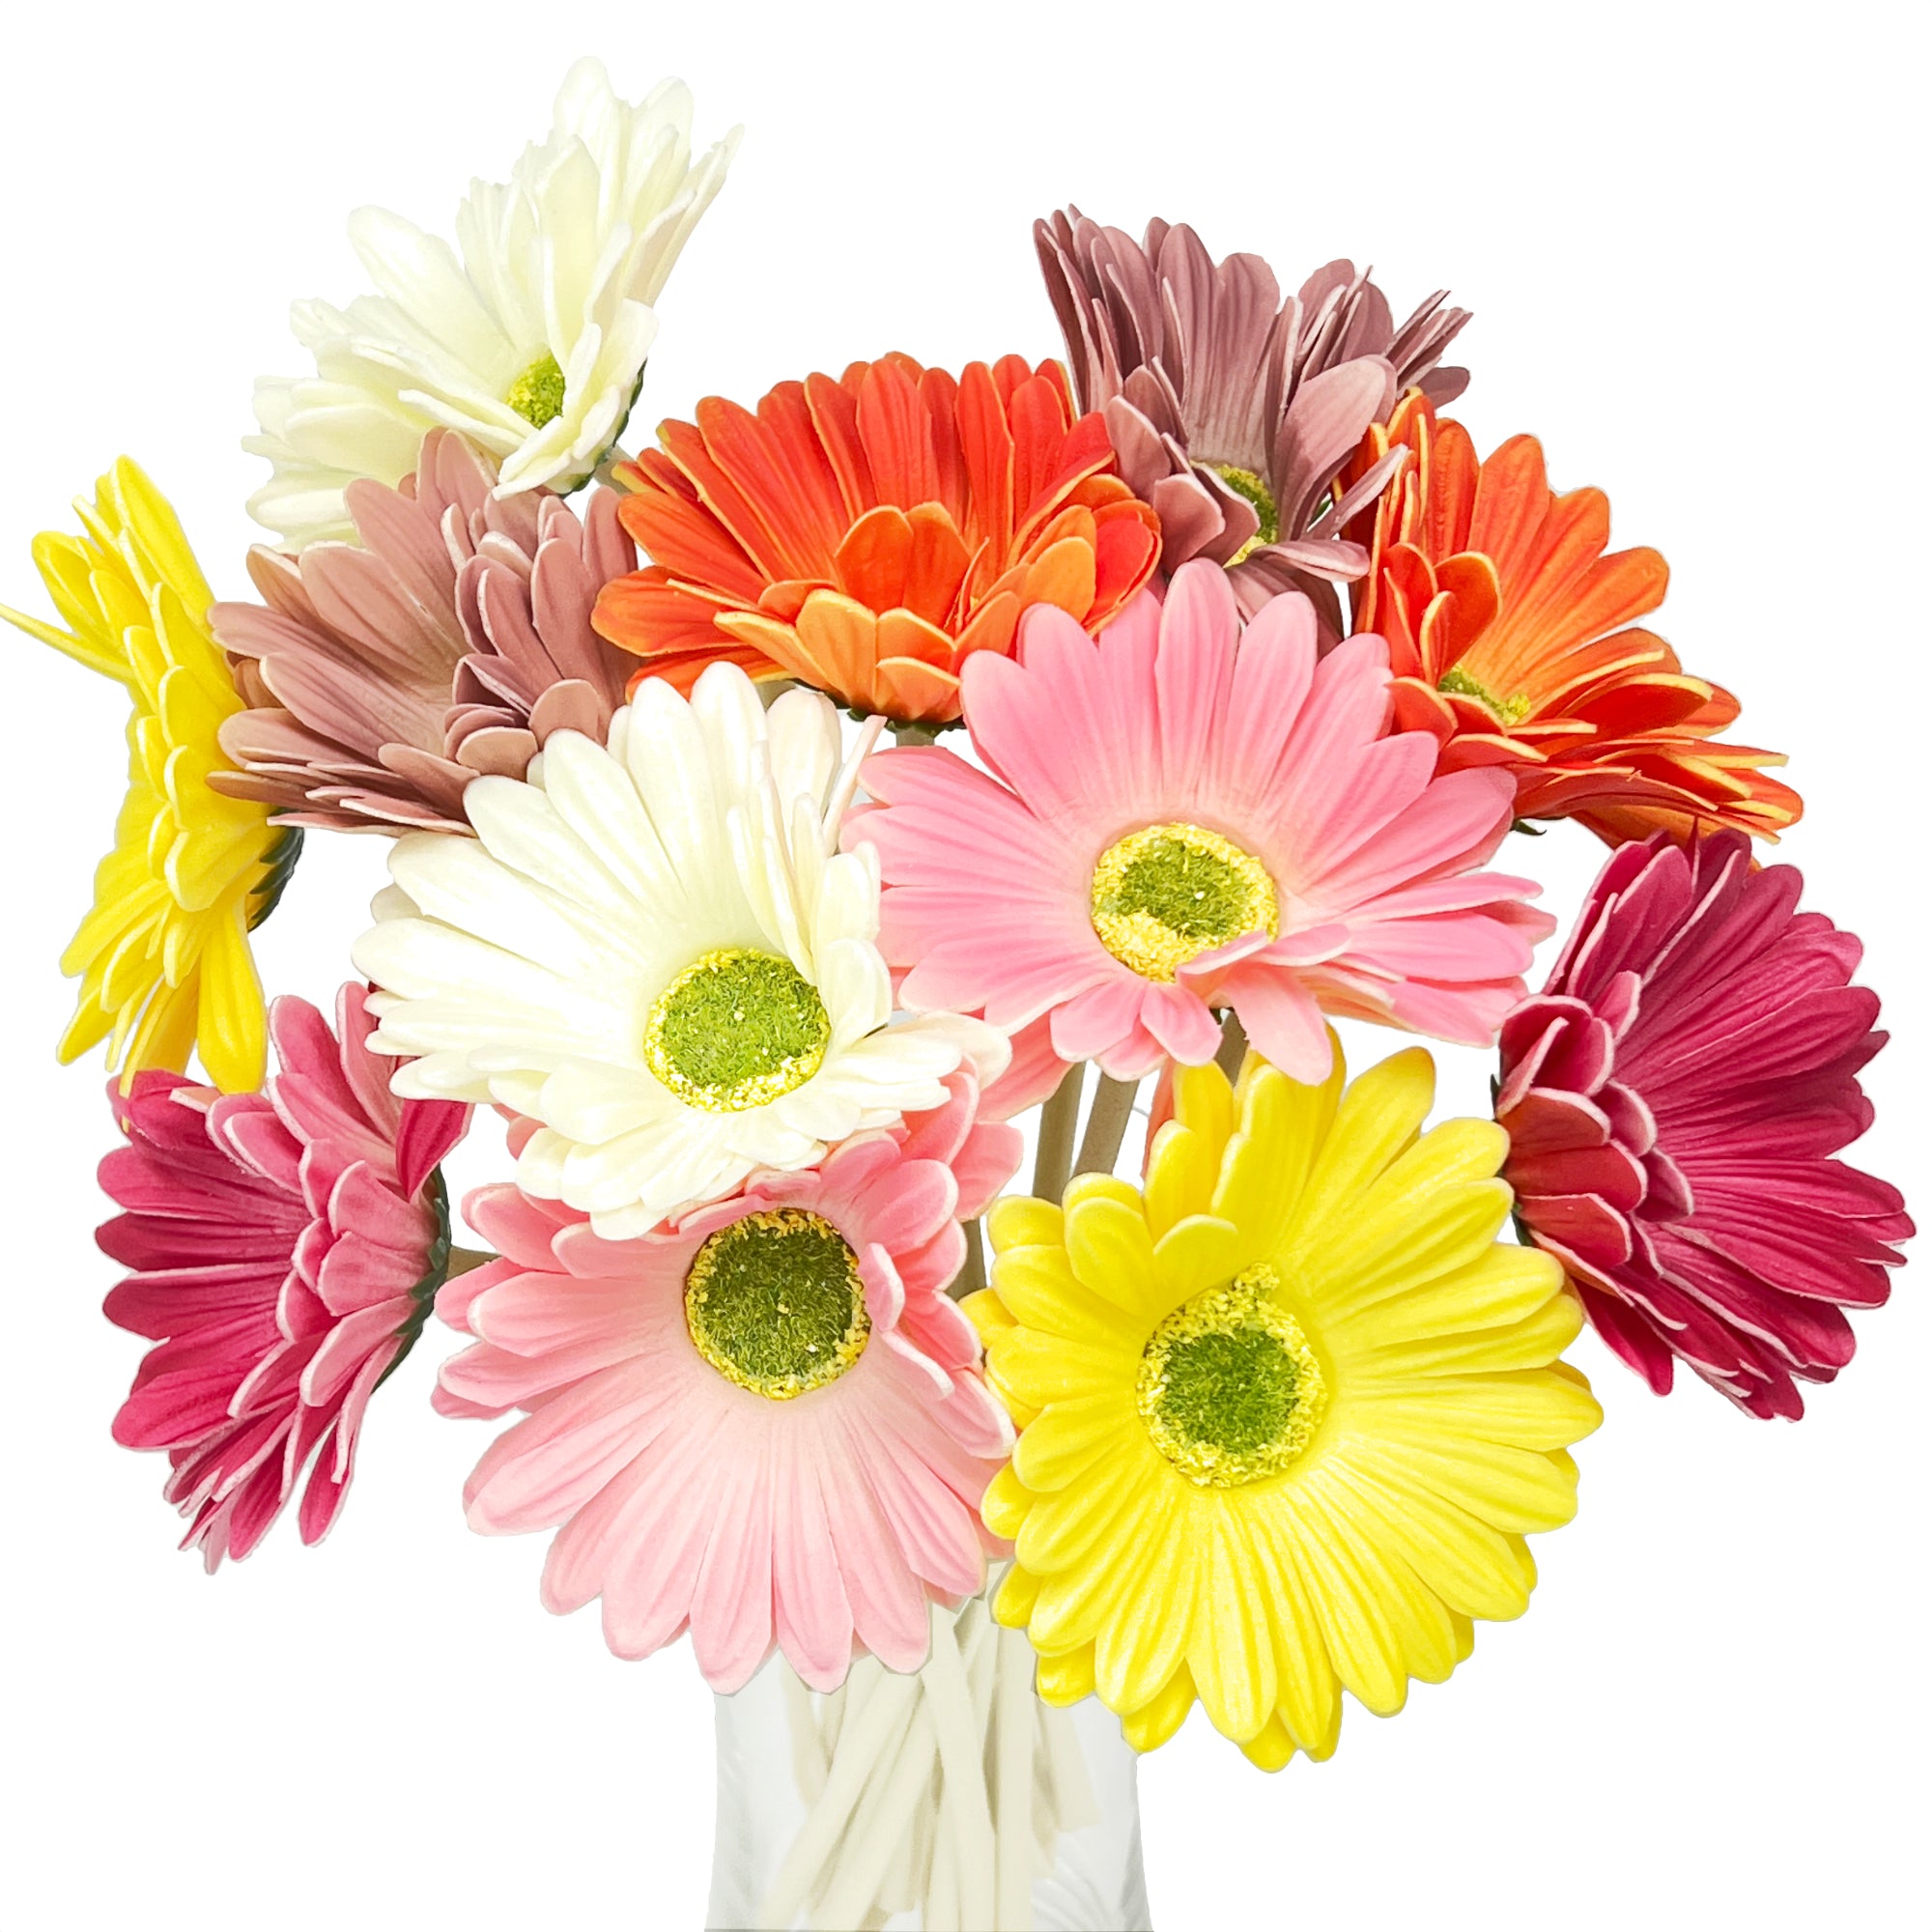 Artificial Daisy Flowers in bright colors - Great Party decorations -  household items - by owner - housewares sale 